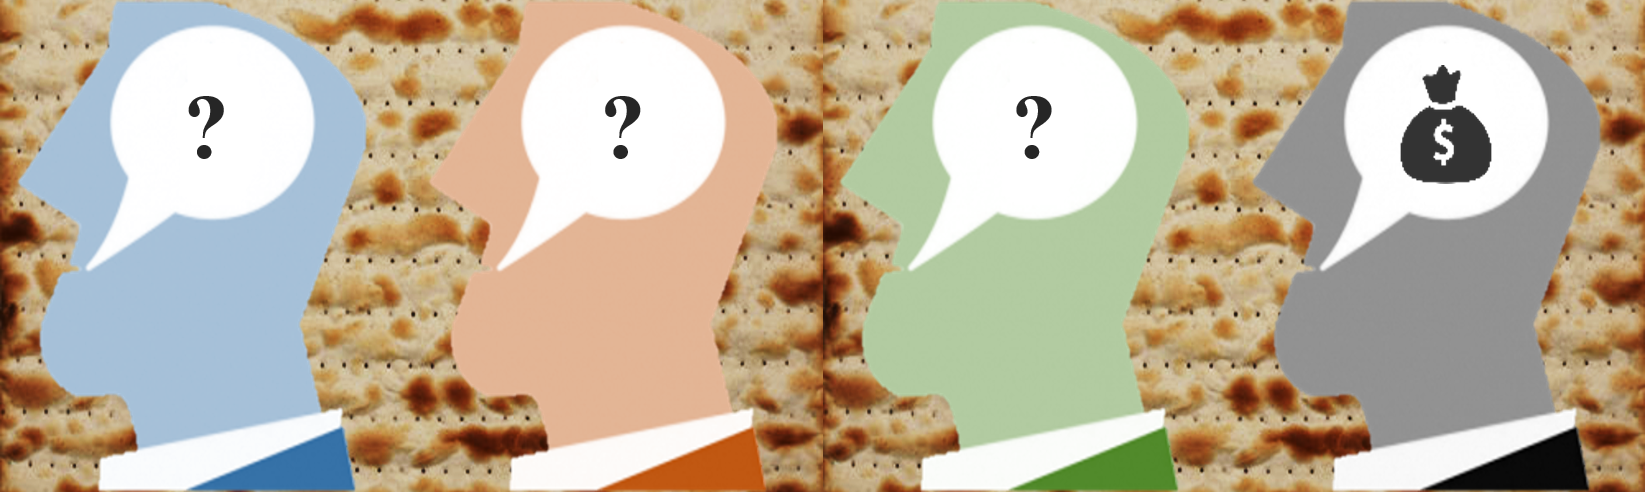 Lessons from Passover: The 4 Sons of Angel Investing